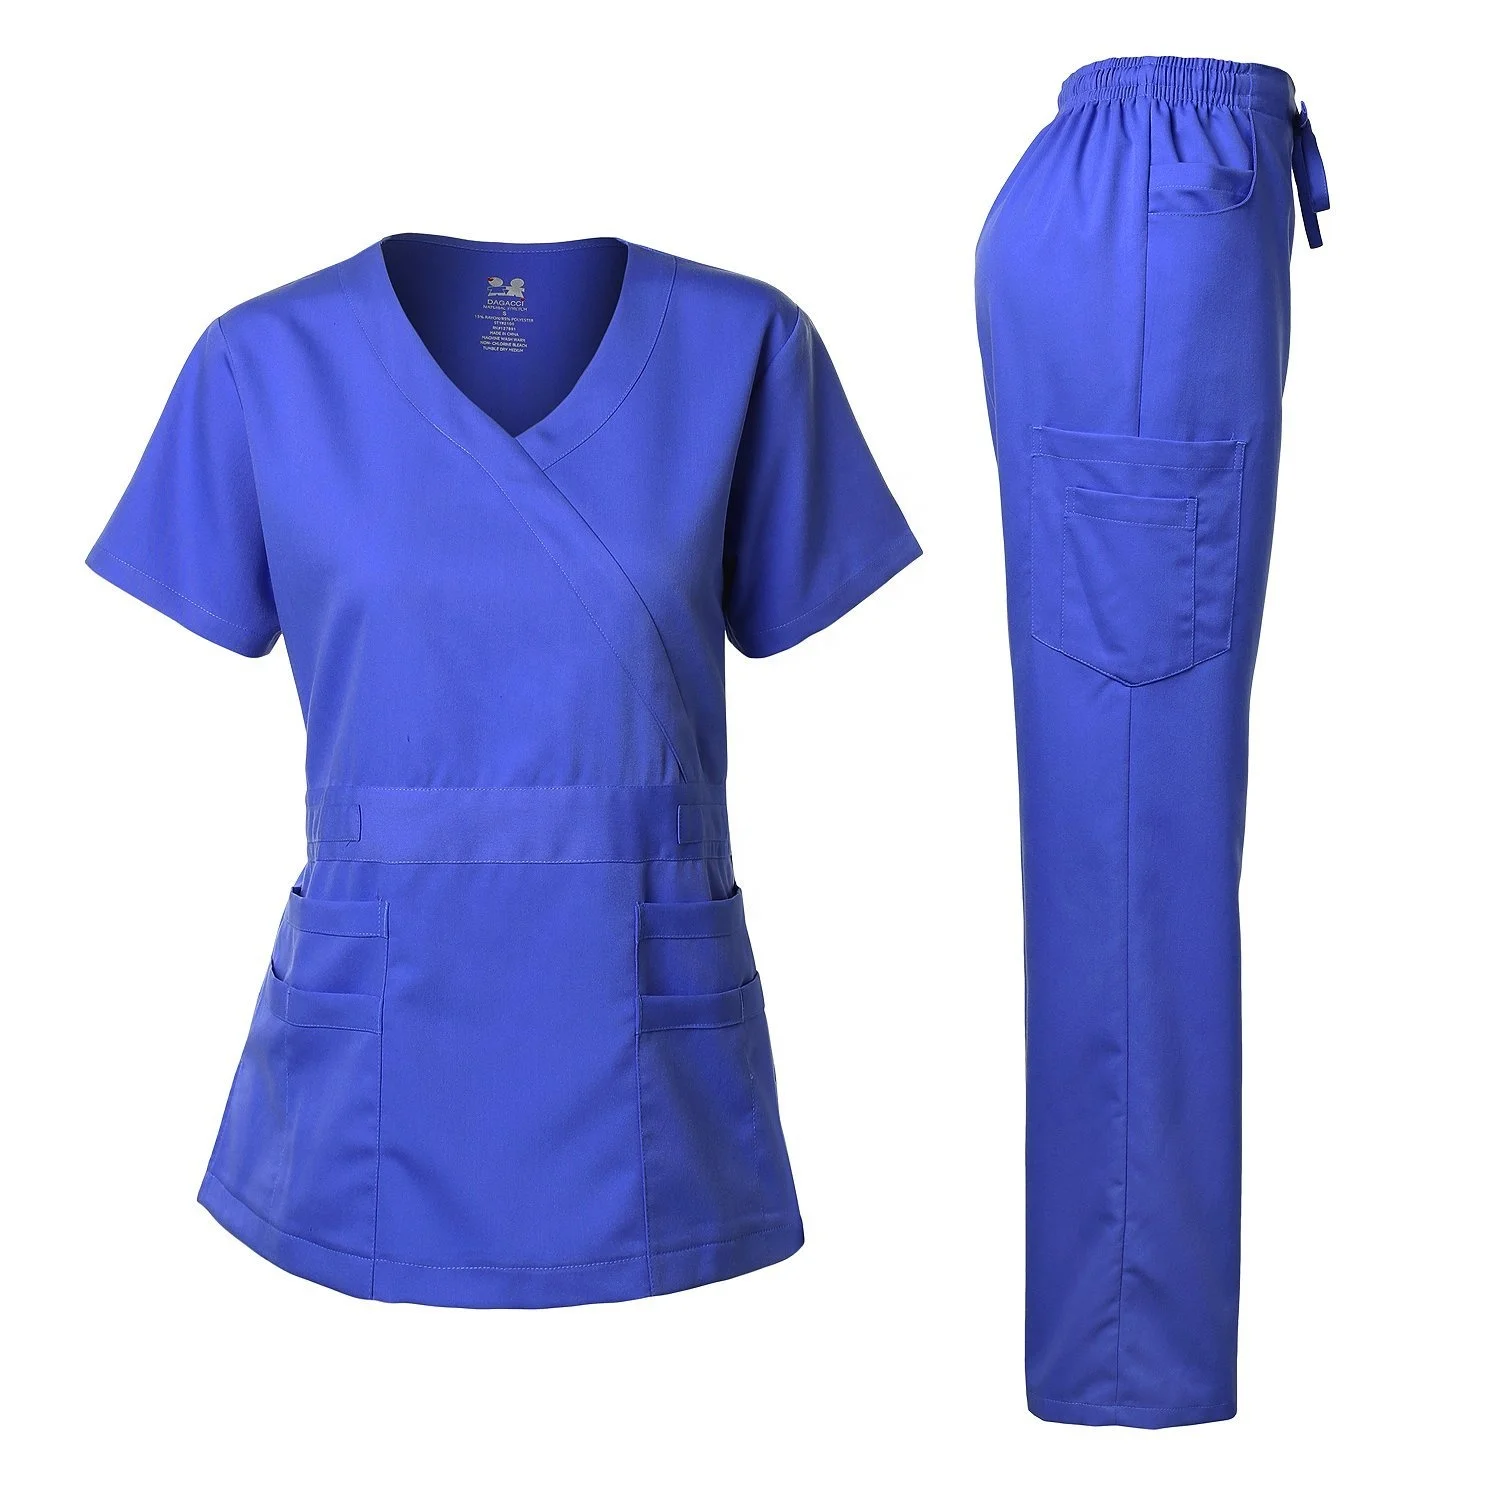 Oem Custom Women Work Wear And Working Clothes Sets Suit Design - Buy ...